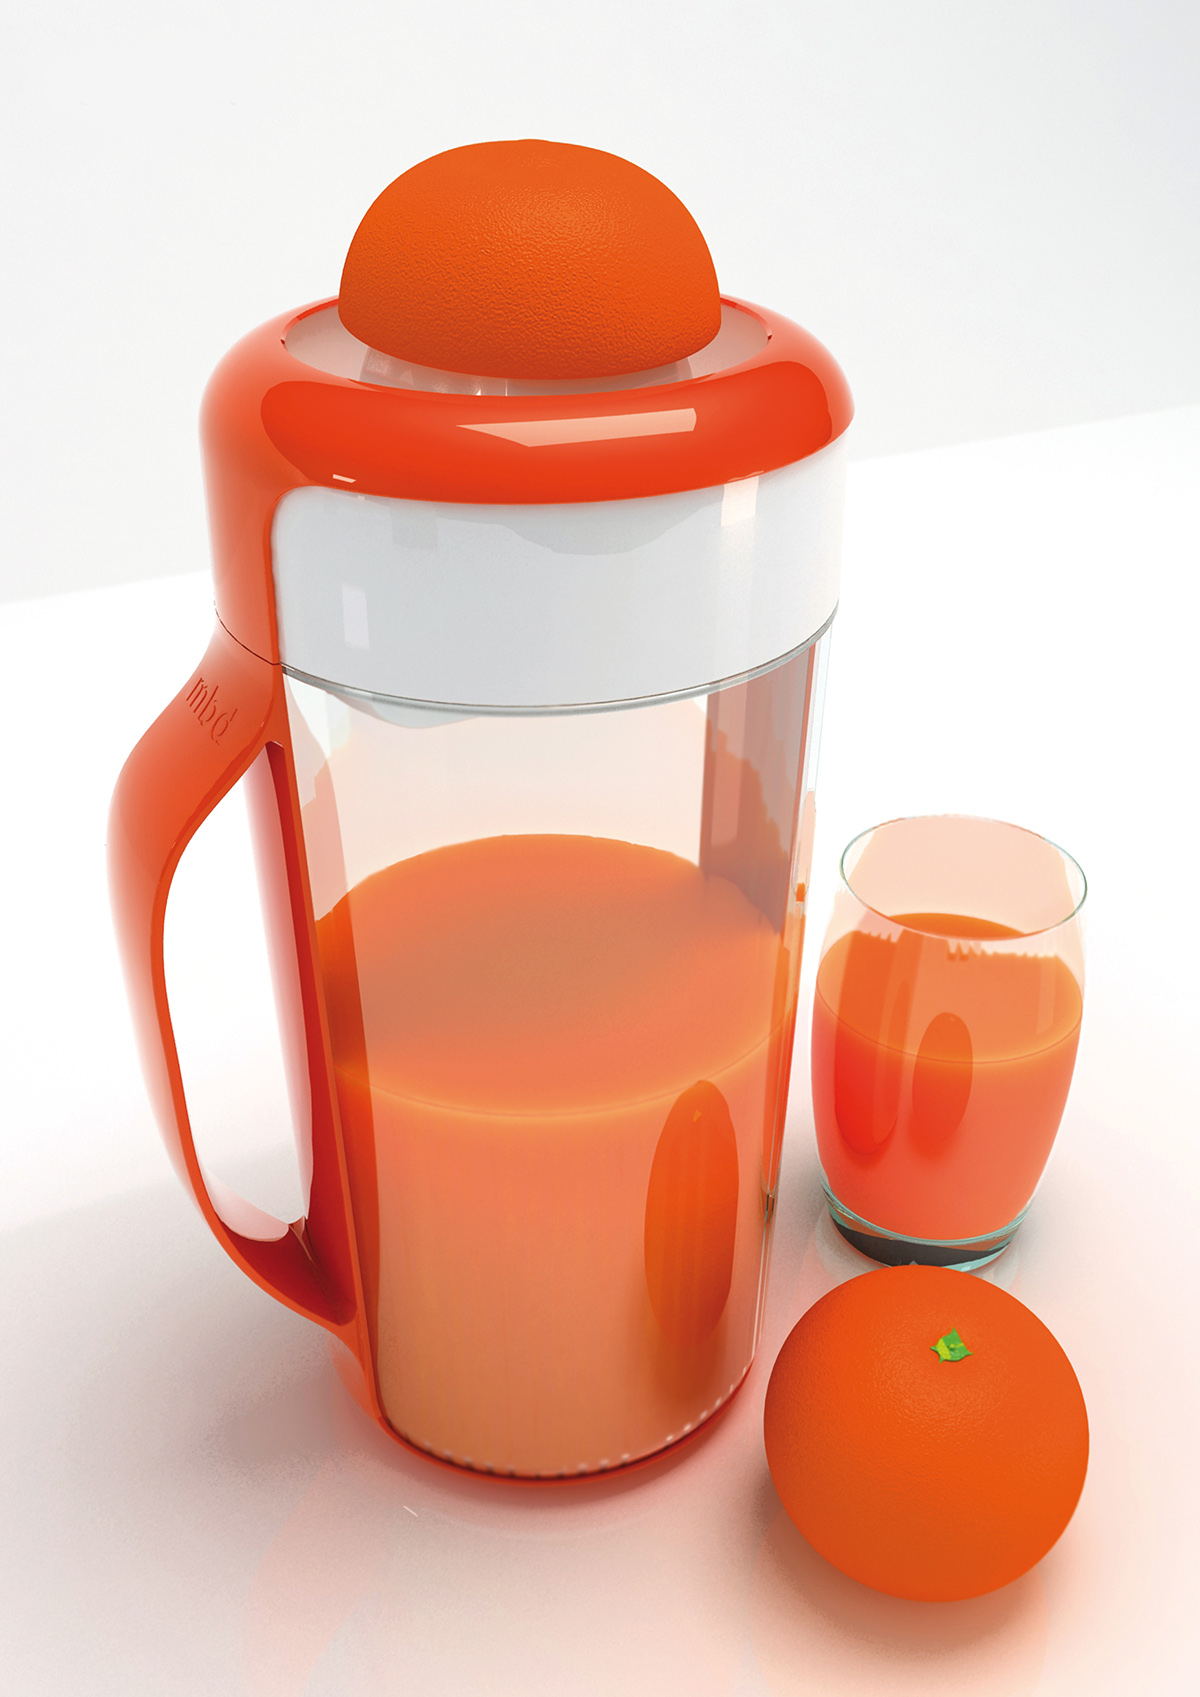 wireless easy to use. family  Juicer  compact  rechargeable  marc  boada industrial design served